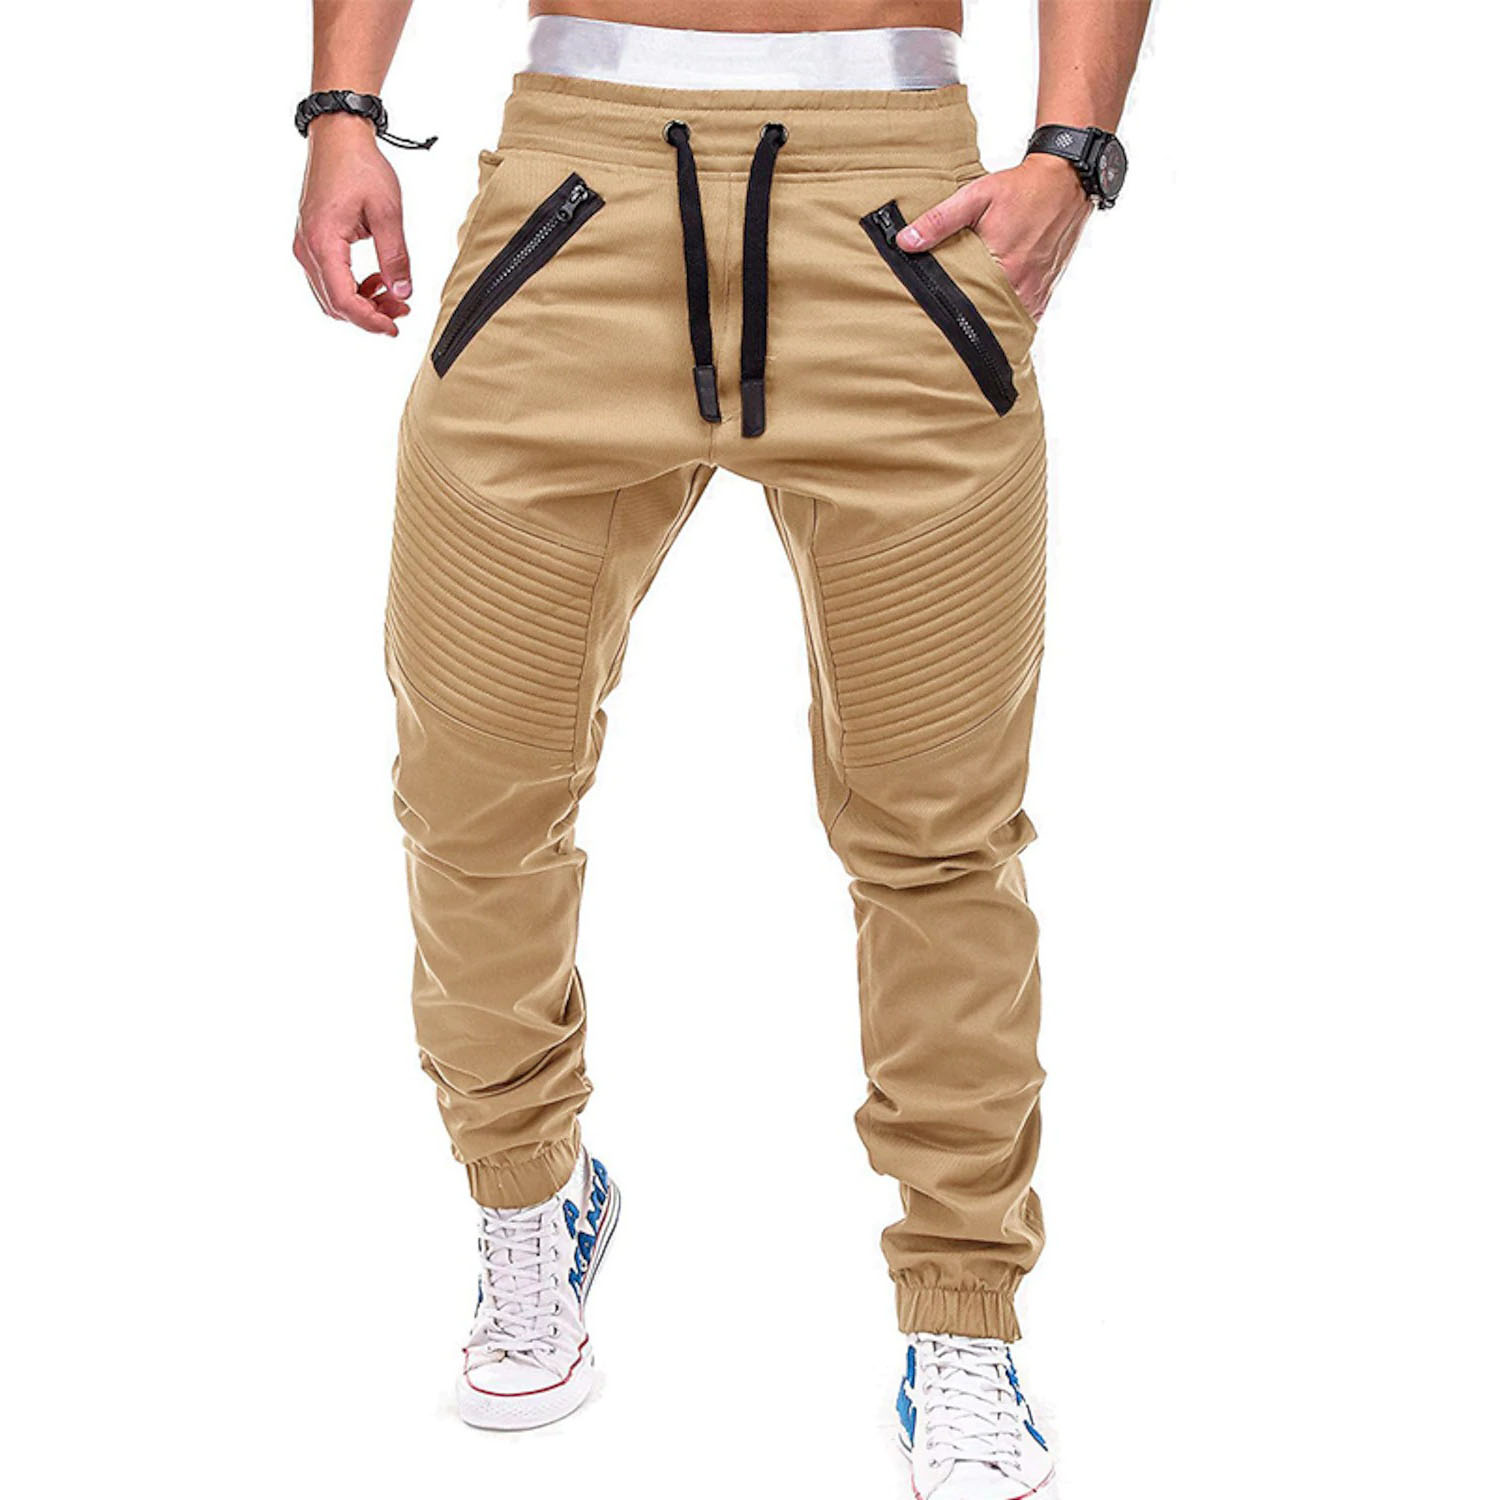 Men's Cargo Jogger Pants Chic Tactical Cargo Multiple Pockets Full Length Casual Inelastic Outdoor Pants